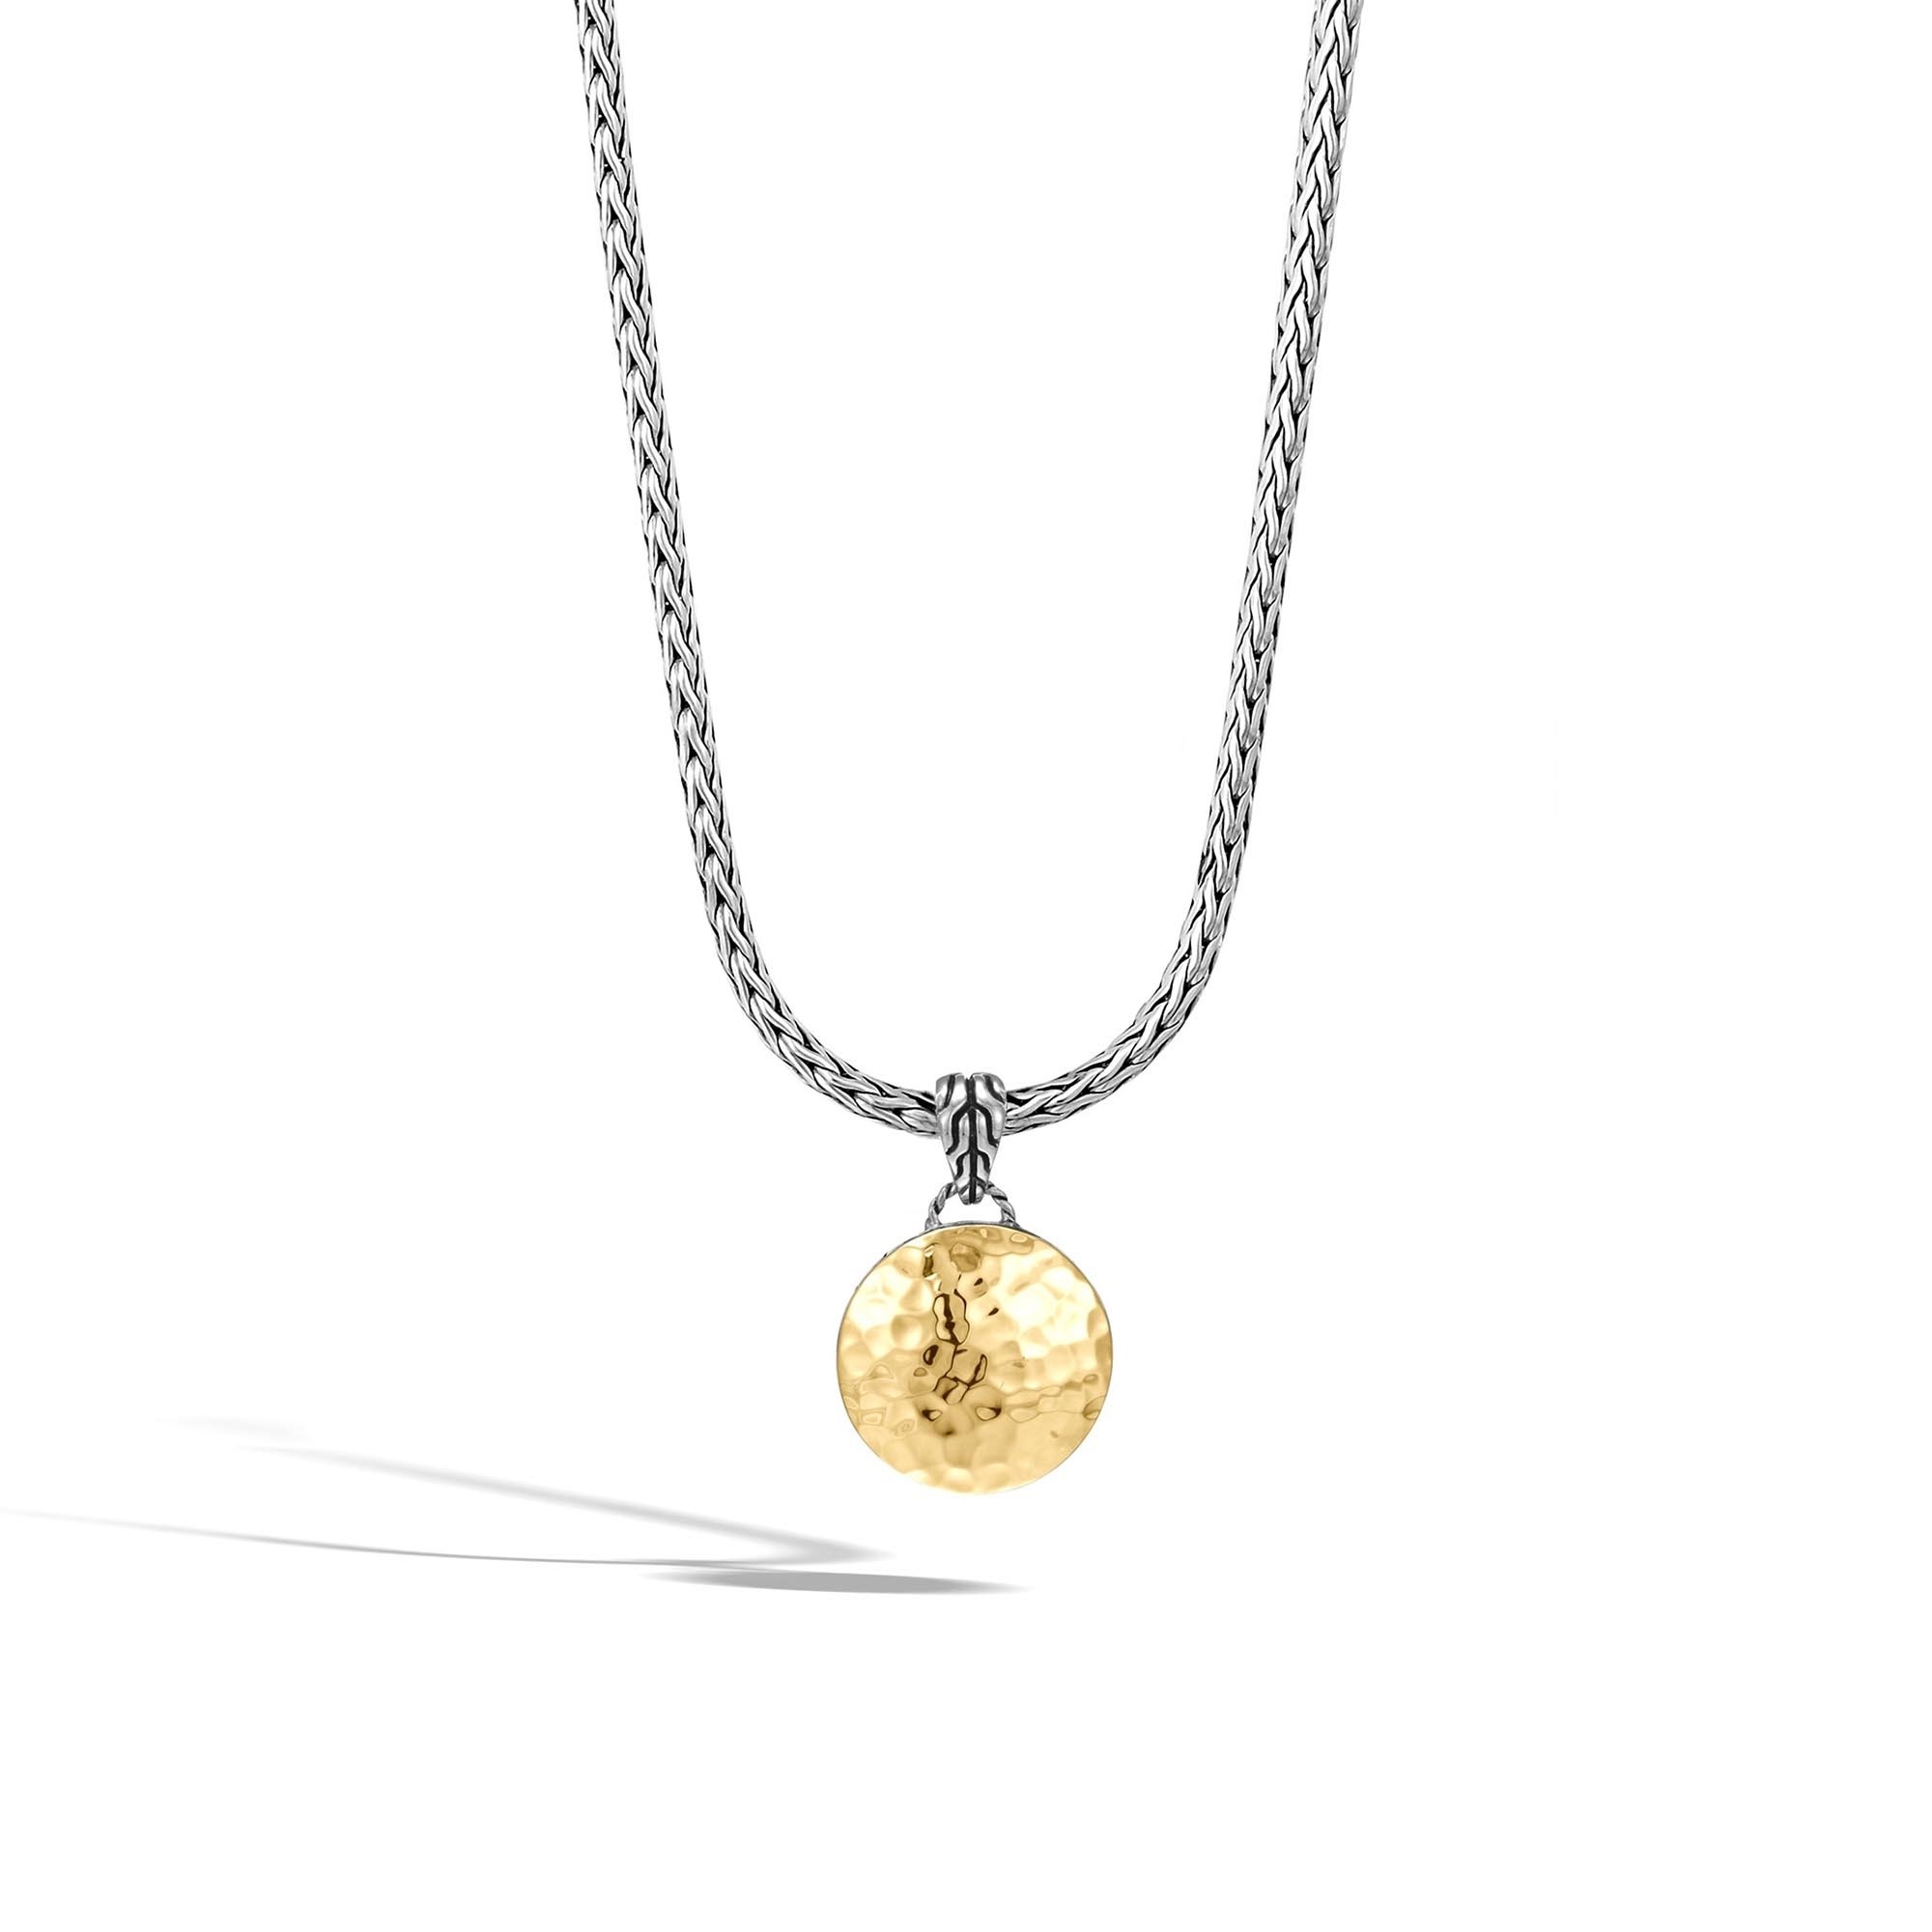 Woven Chain Necklace Sterling Silver with 18K Gold Pendant